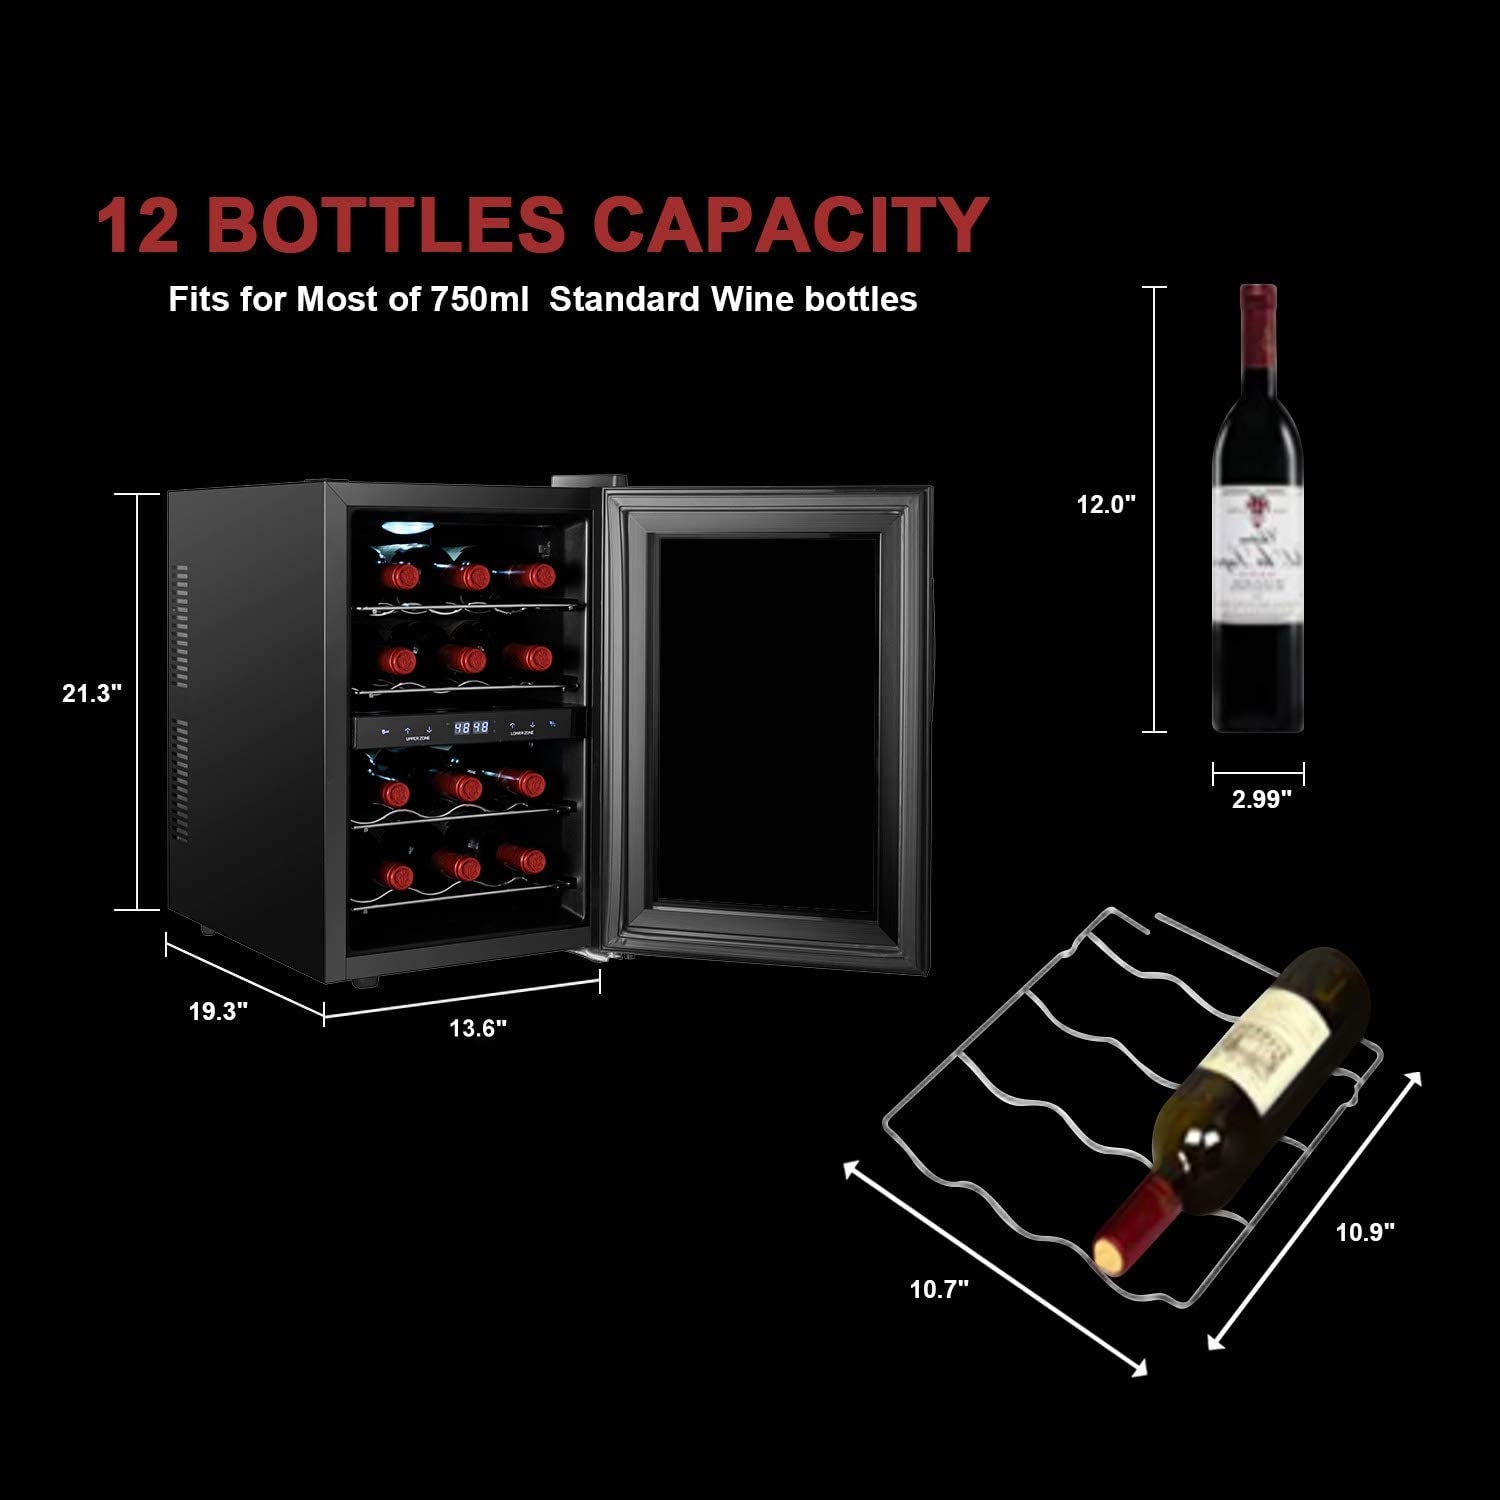 Dual Zone Wine Cooler, 12 Bottles Mini Small Wine Cooler Refrigerator Chiller Fridge 45F-65F for Reds Whites Wine Champagne Sparkling in Home Bar Office Kitchen Bedroom Countertop (12 Bottles)